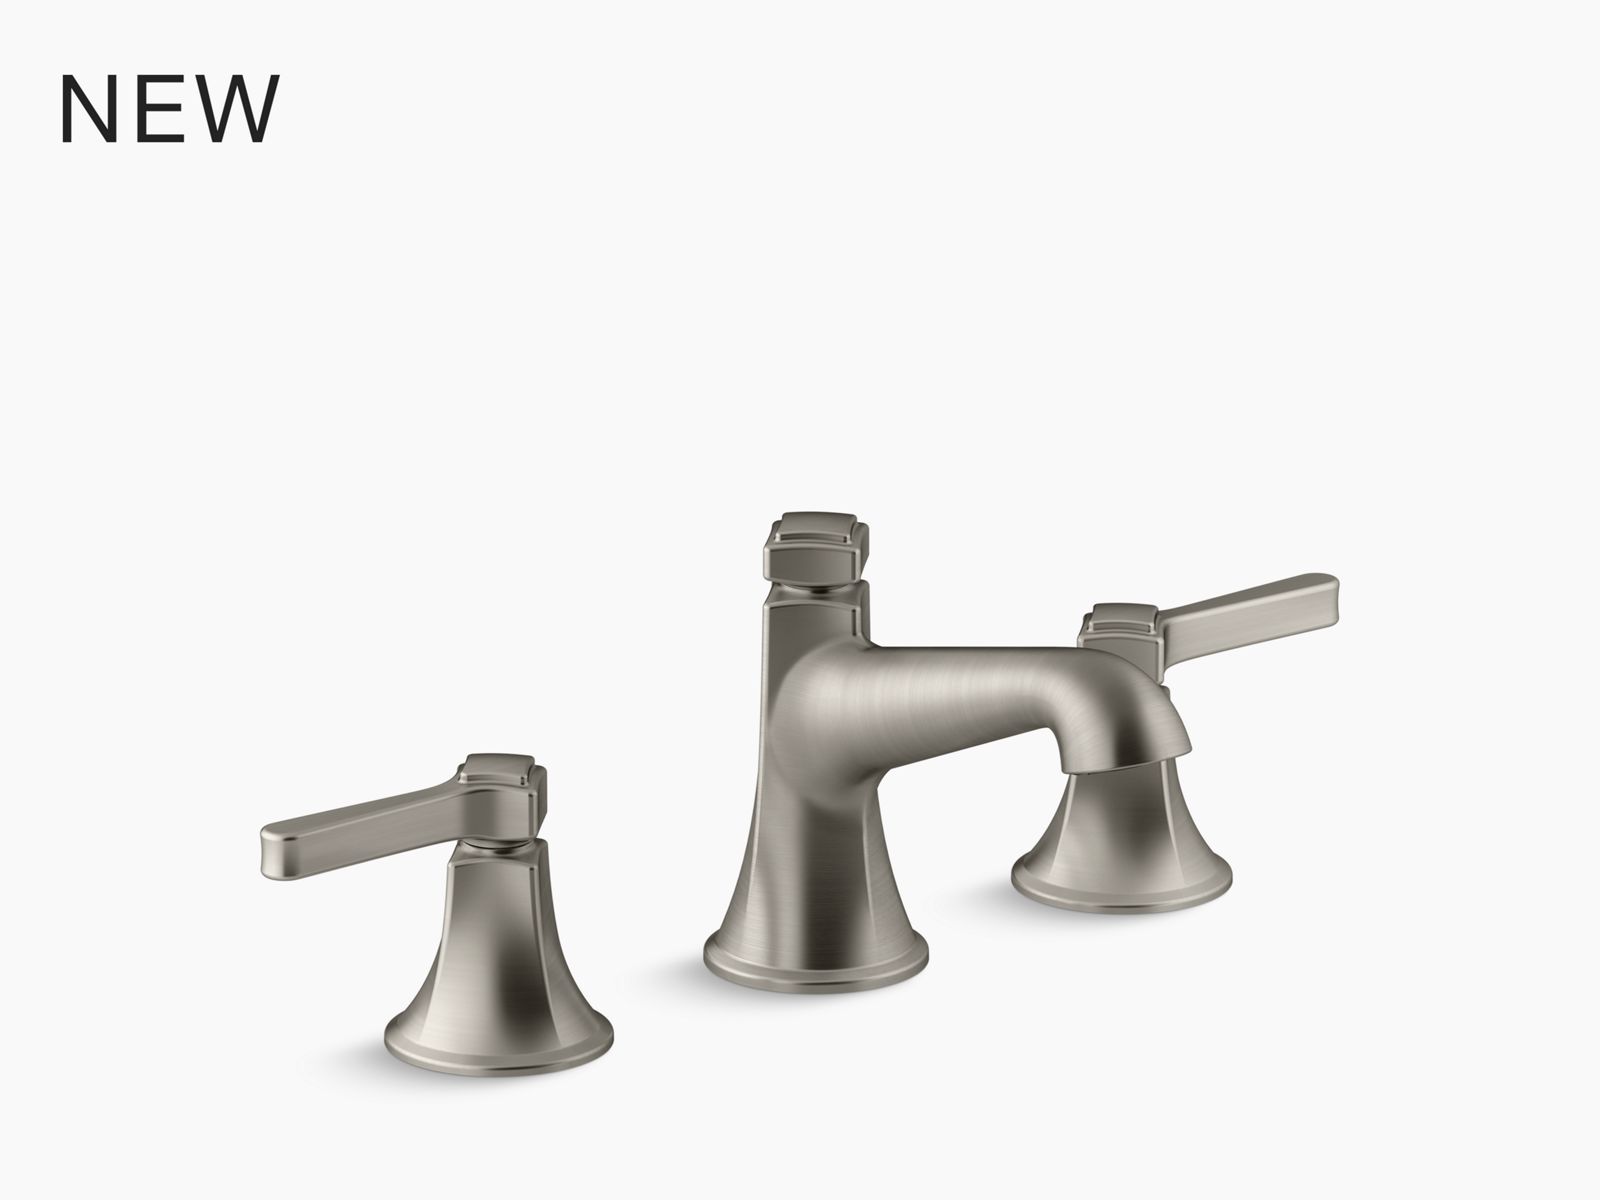 Traditional wall-mount bathroom lavatory faucet with arching spout